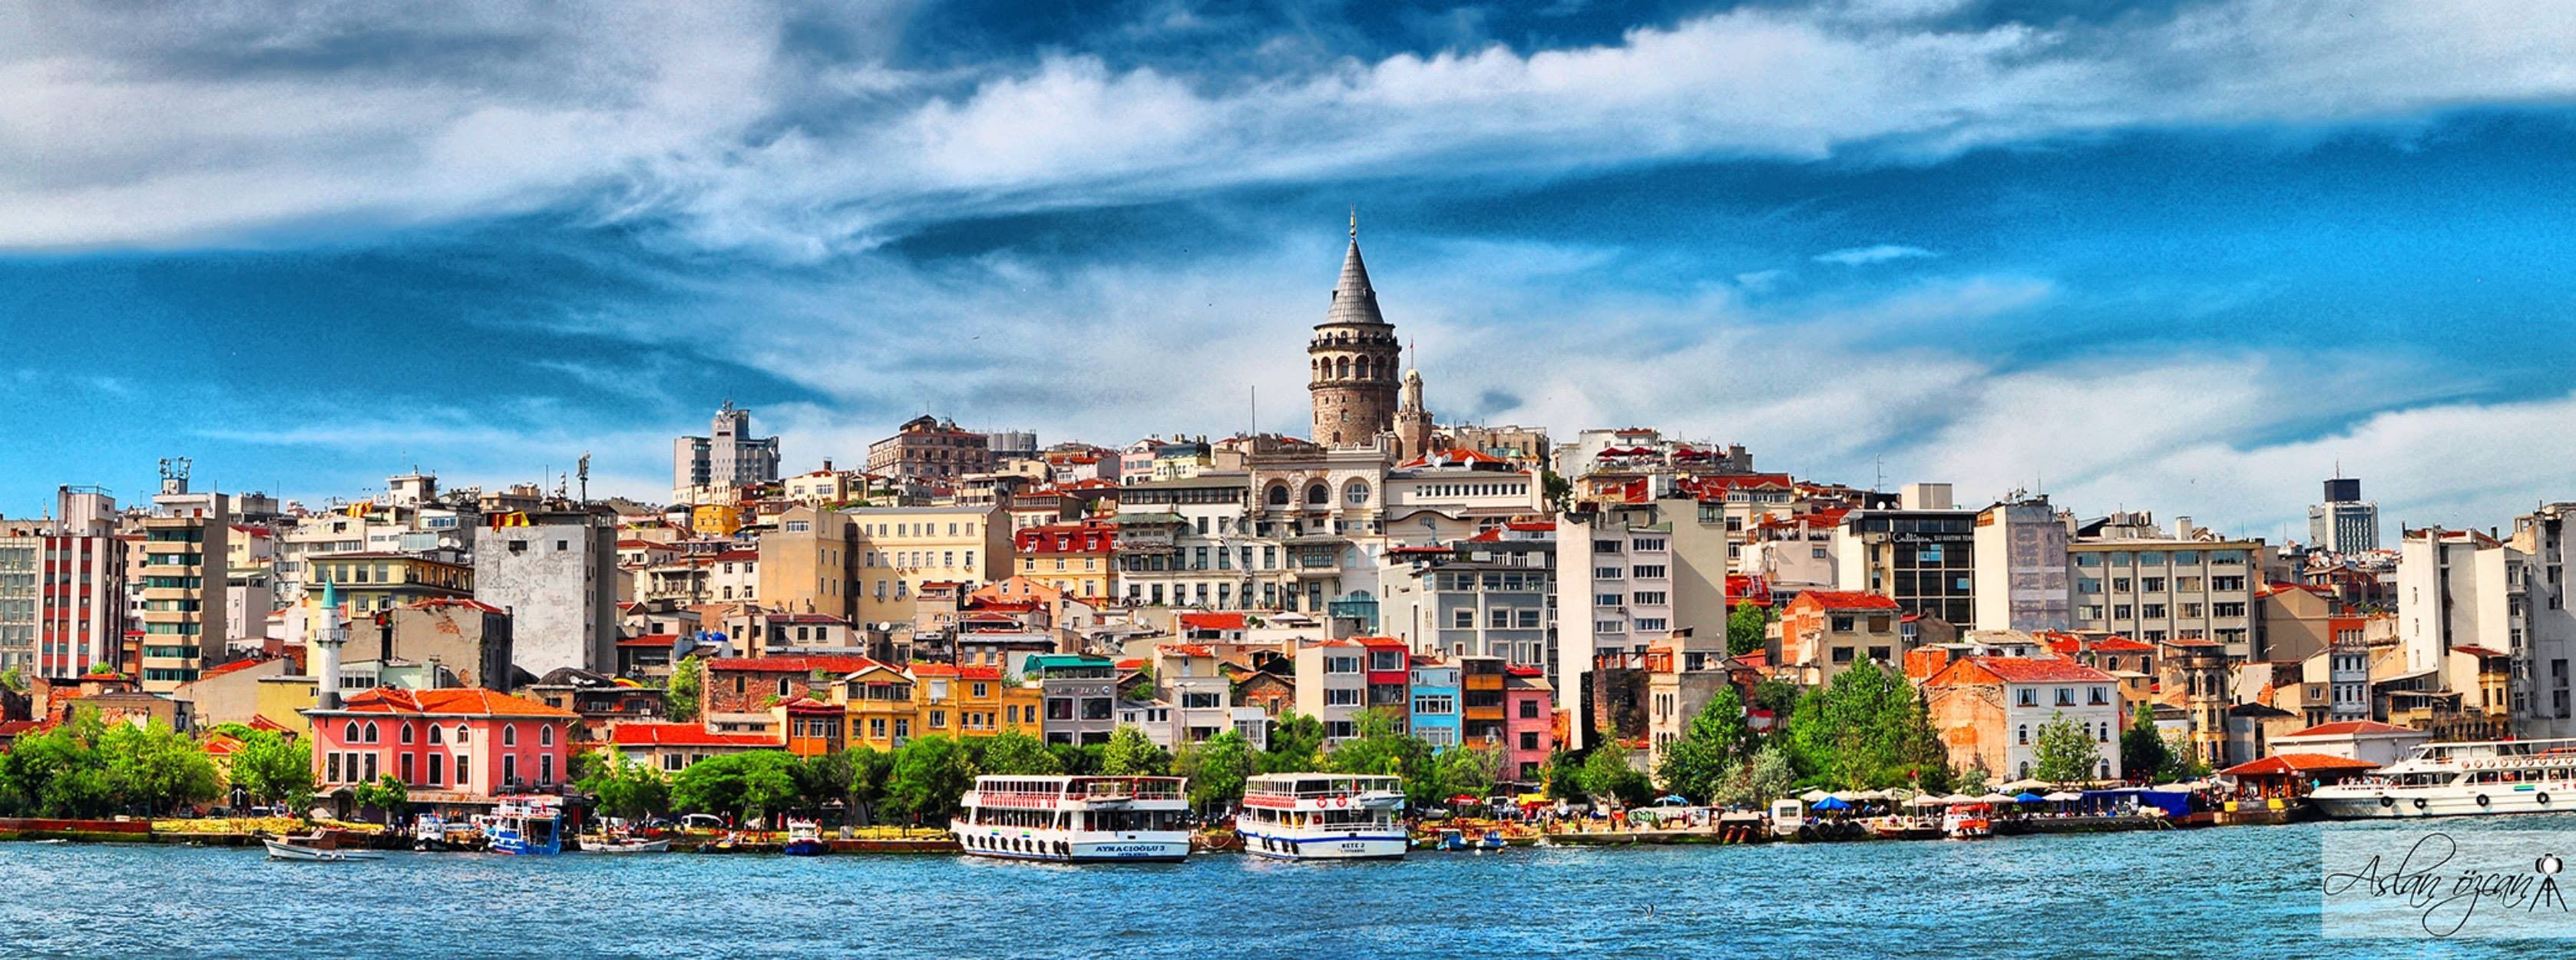 Istanbul, Turkey Wallpaper in 4K. Cool places to visit, Istanbul